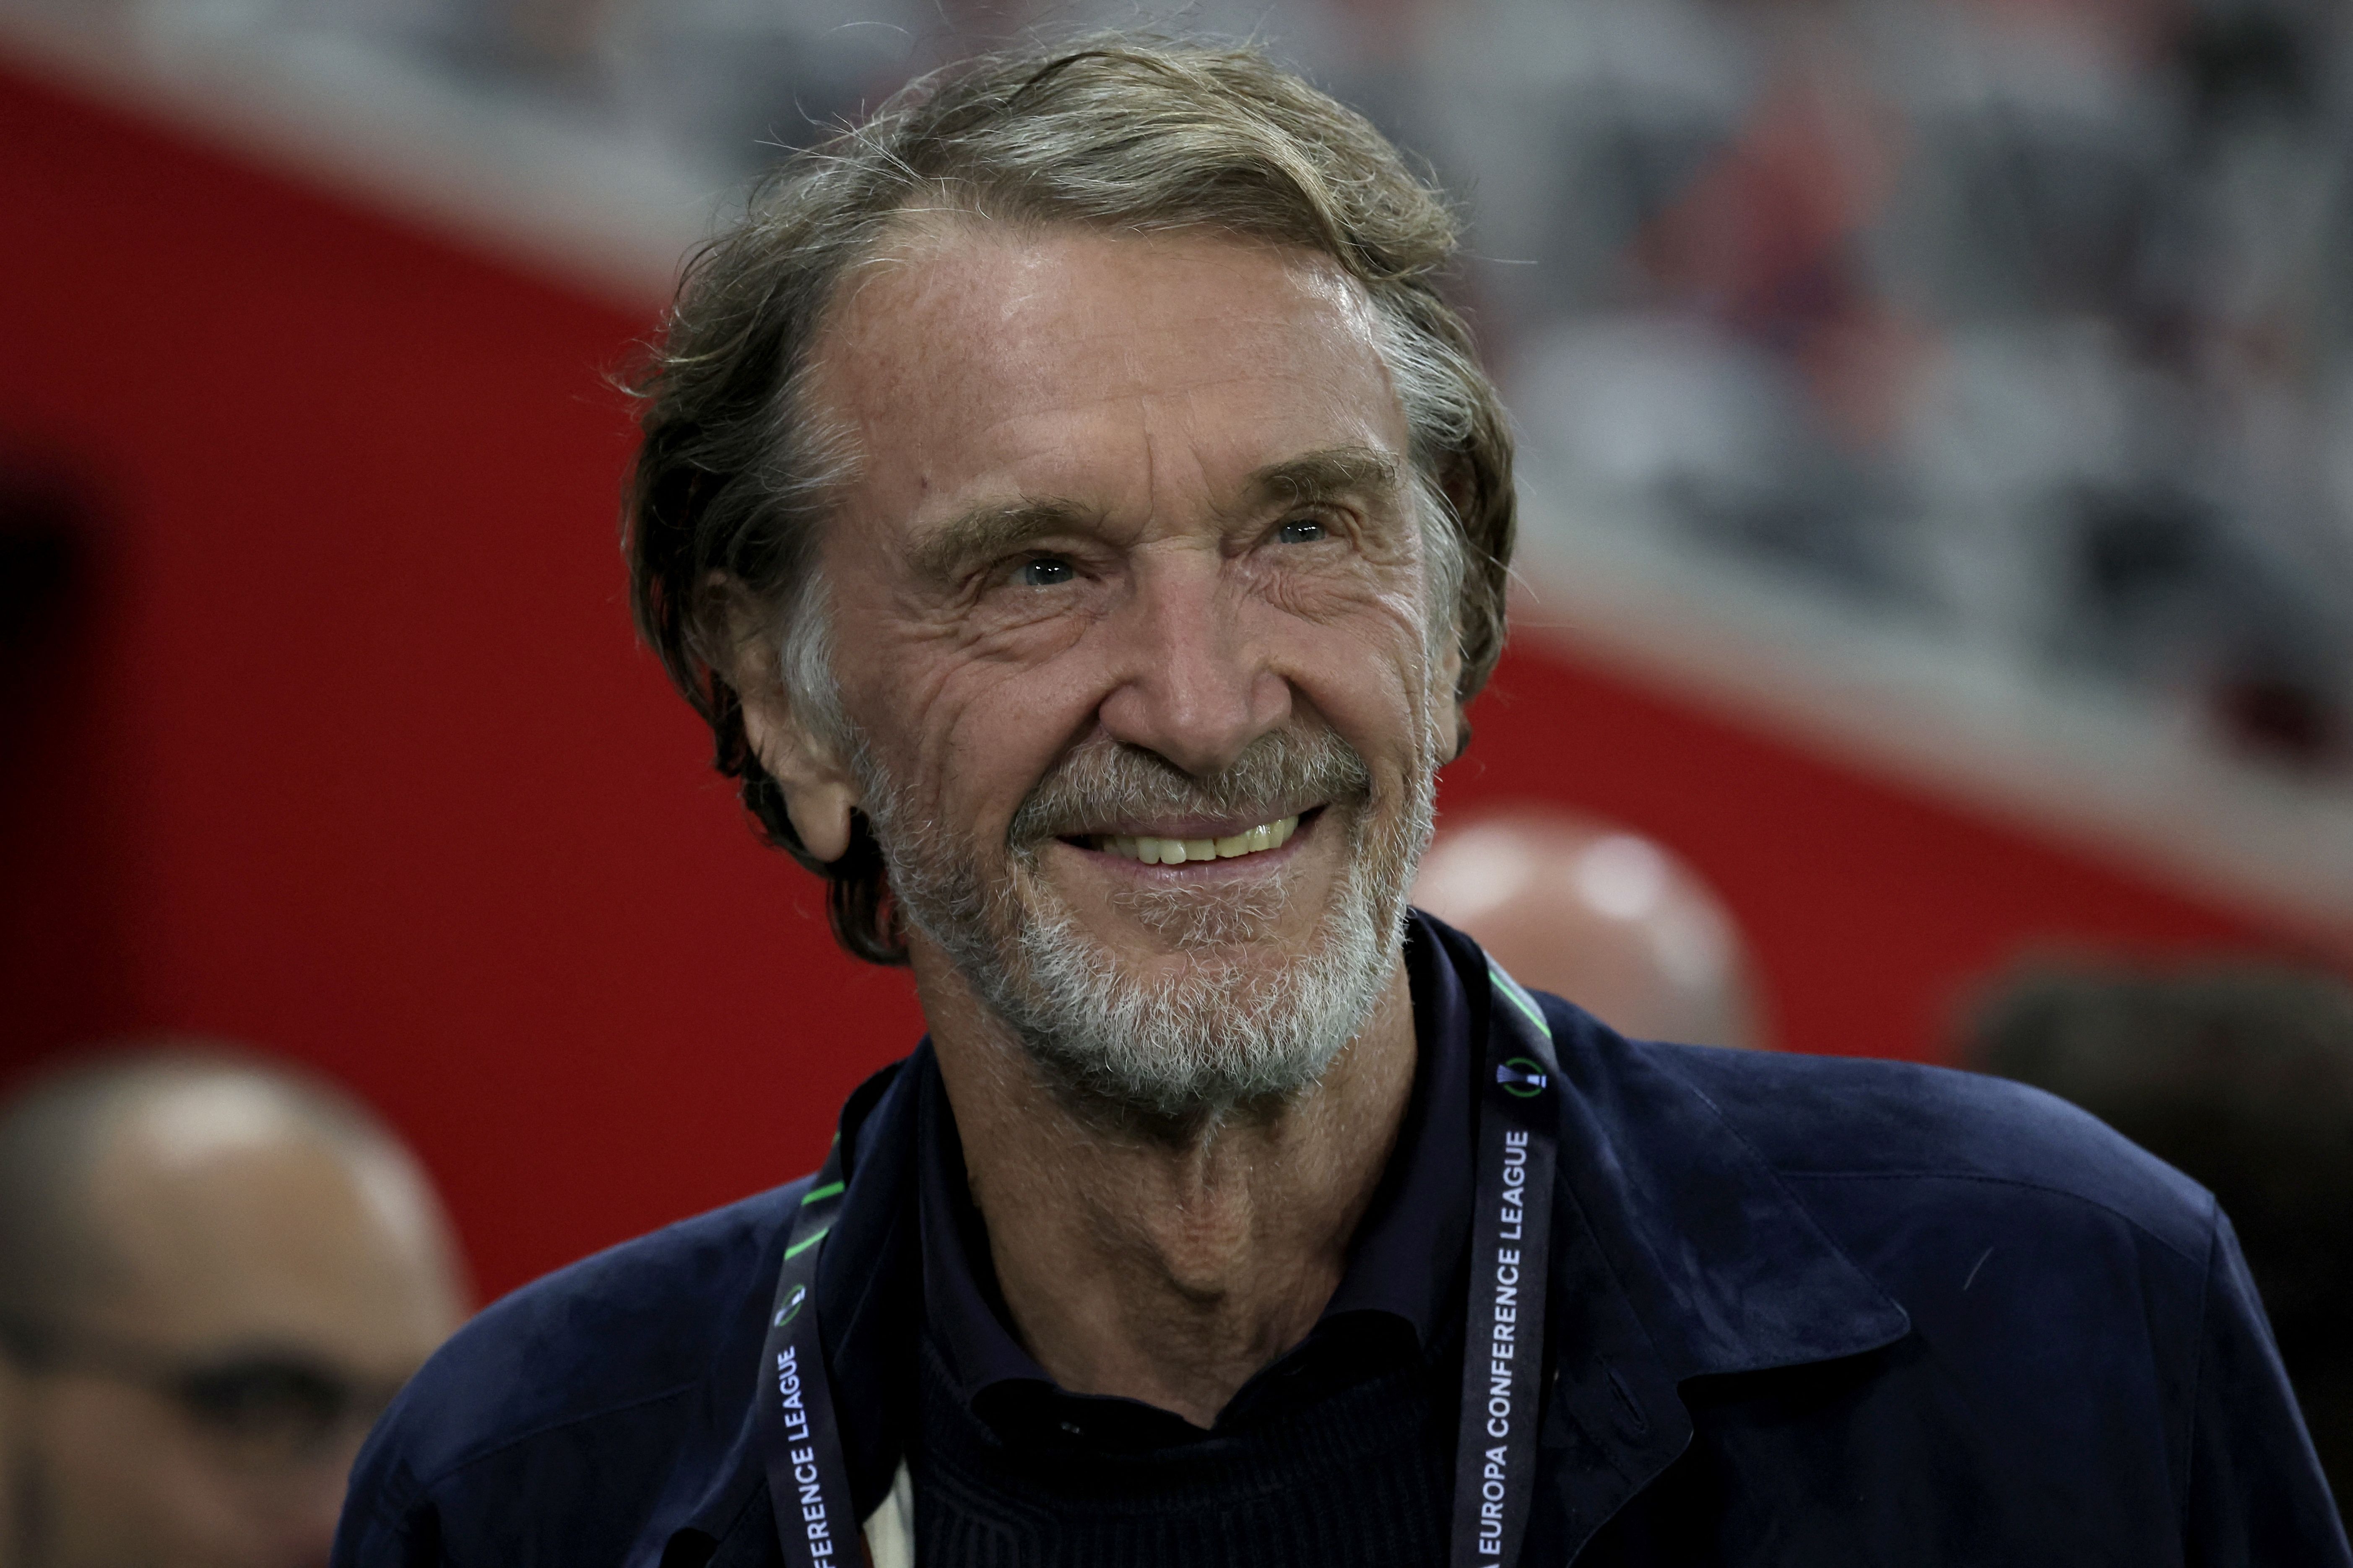 Sir Jim Ratcliffe might have already identified ideal Ten Hag replacement at Manchester United